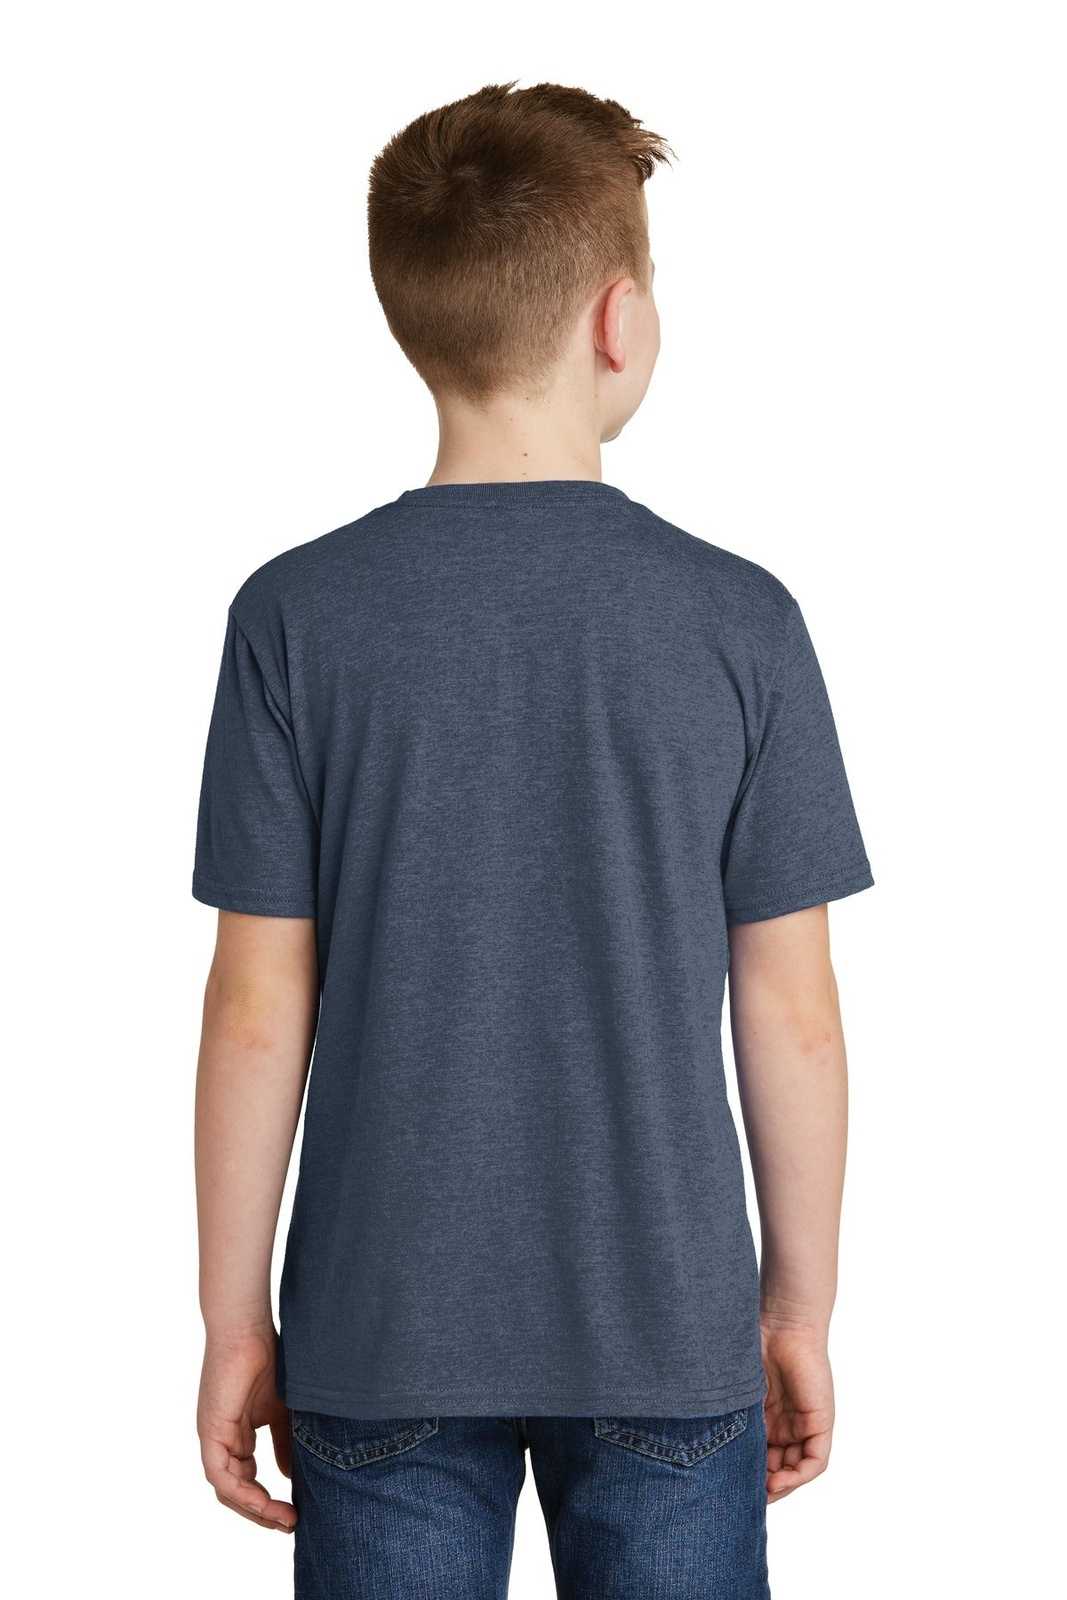 District DT6000Y Youth Very Important Tee - Heathered Navy - HIT a Double - 1